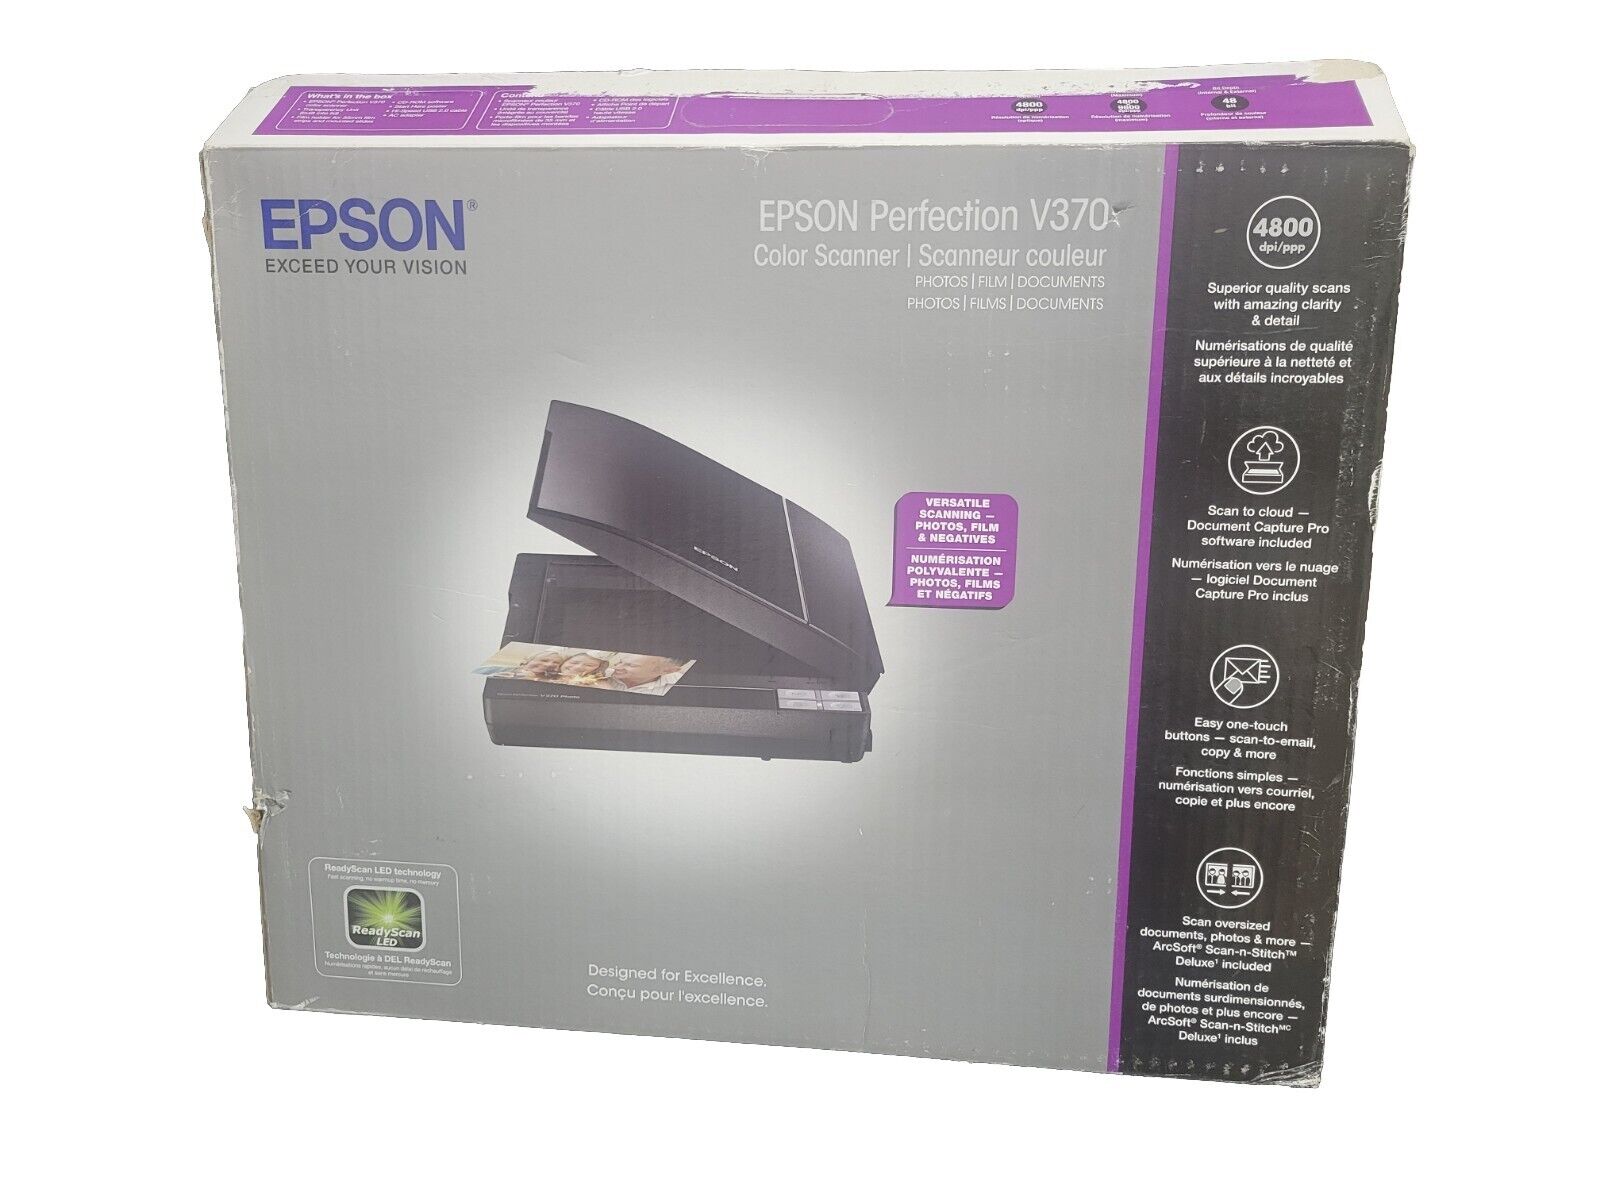 Epson Perfection Flatbed Scanner V370 Photo  - New Open